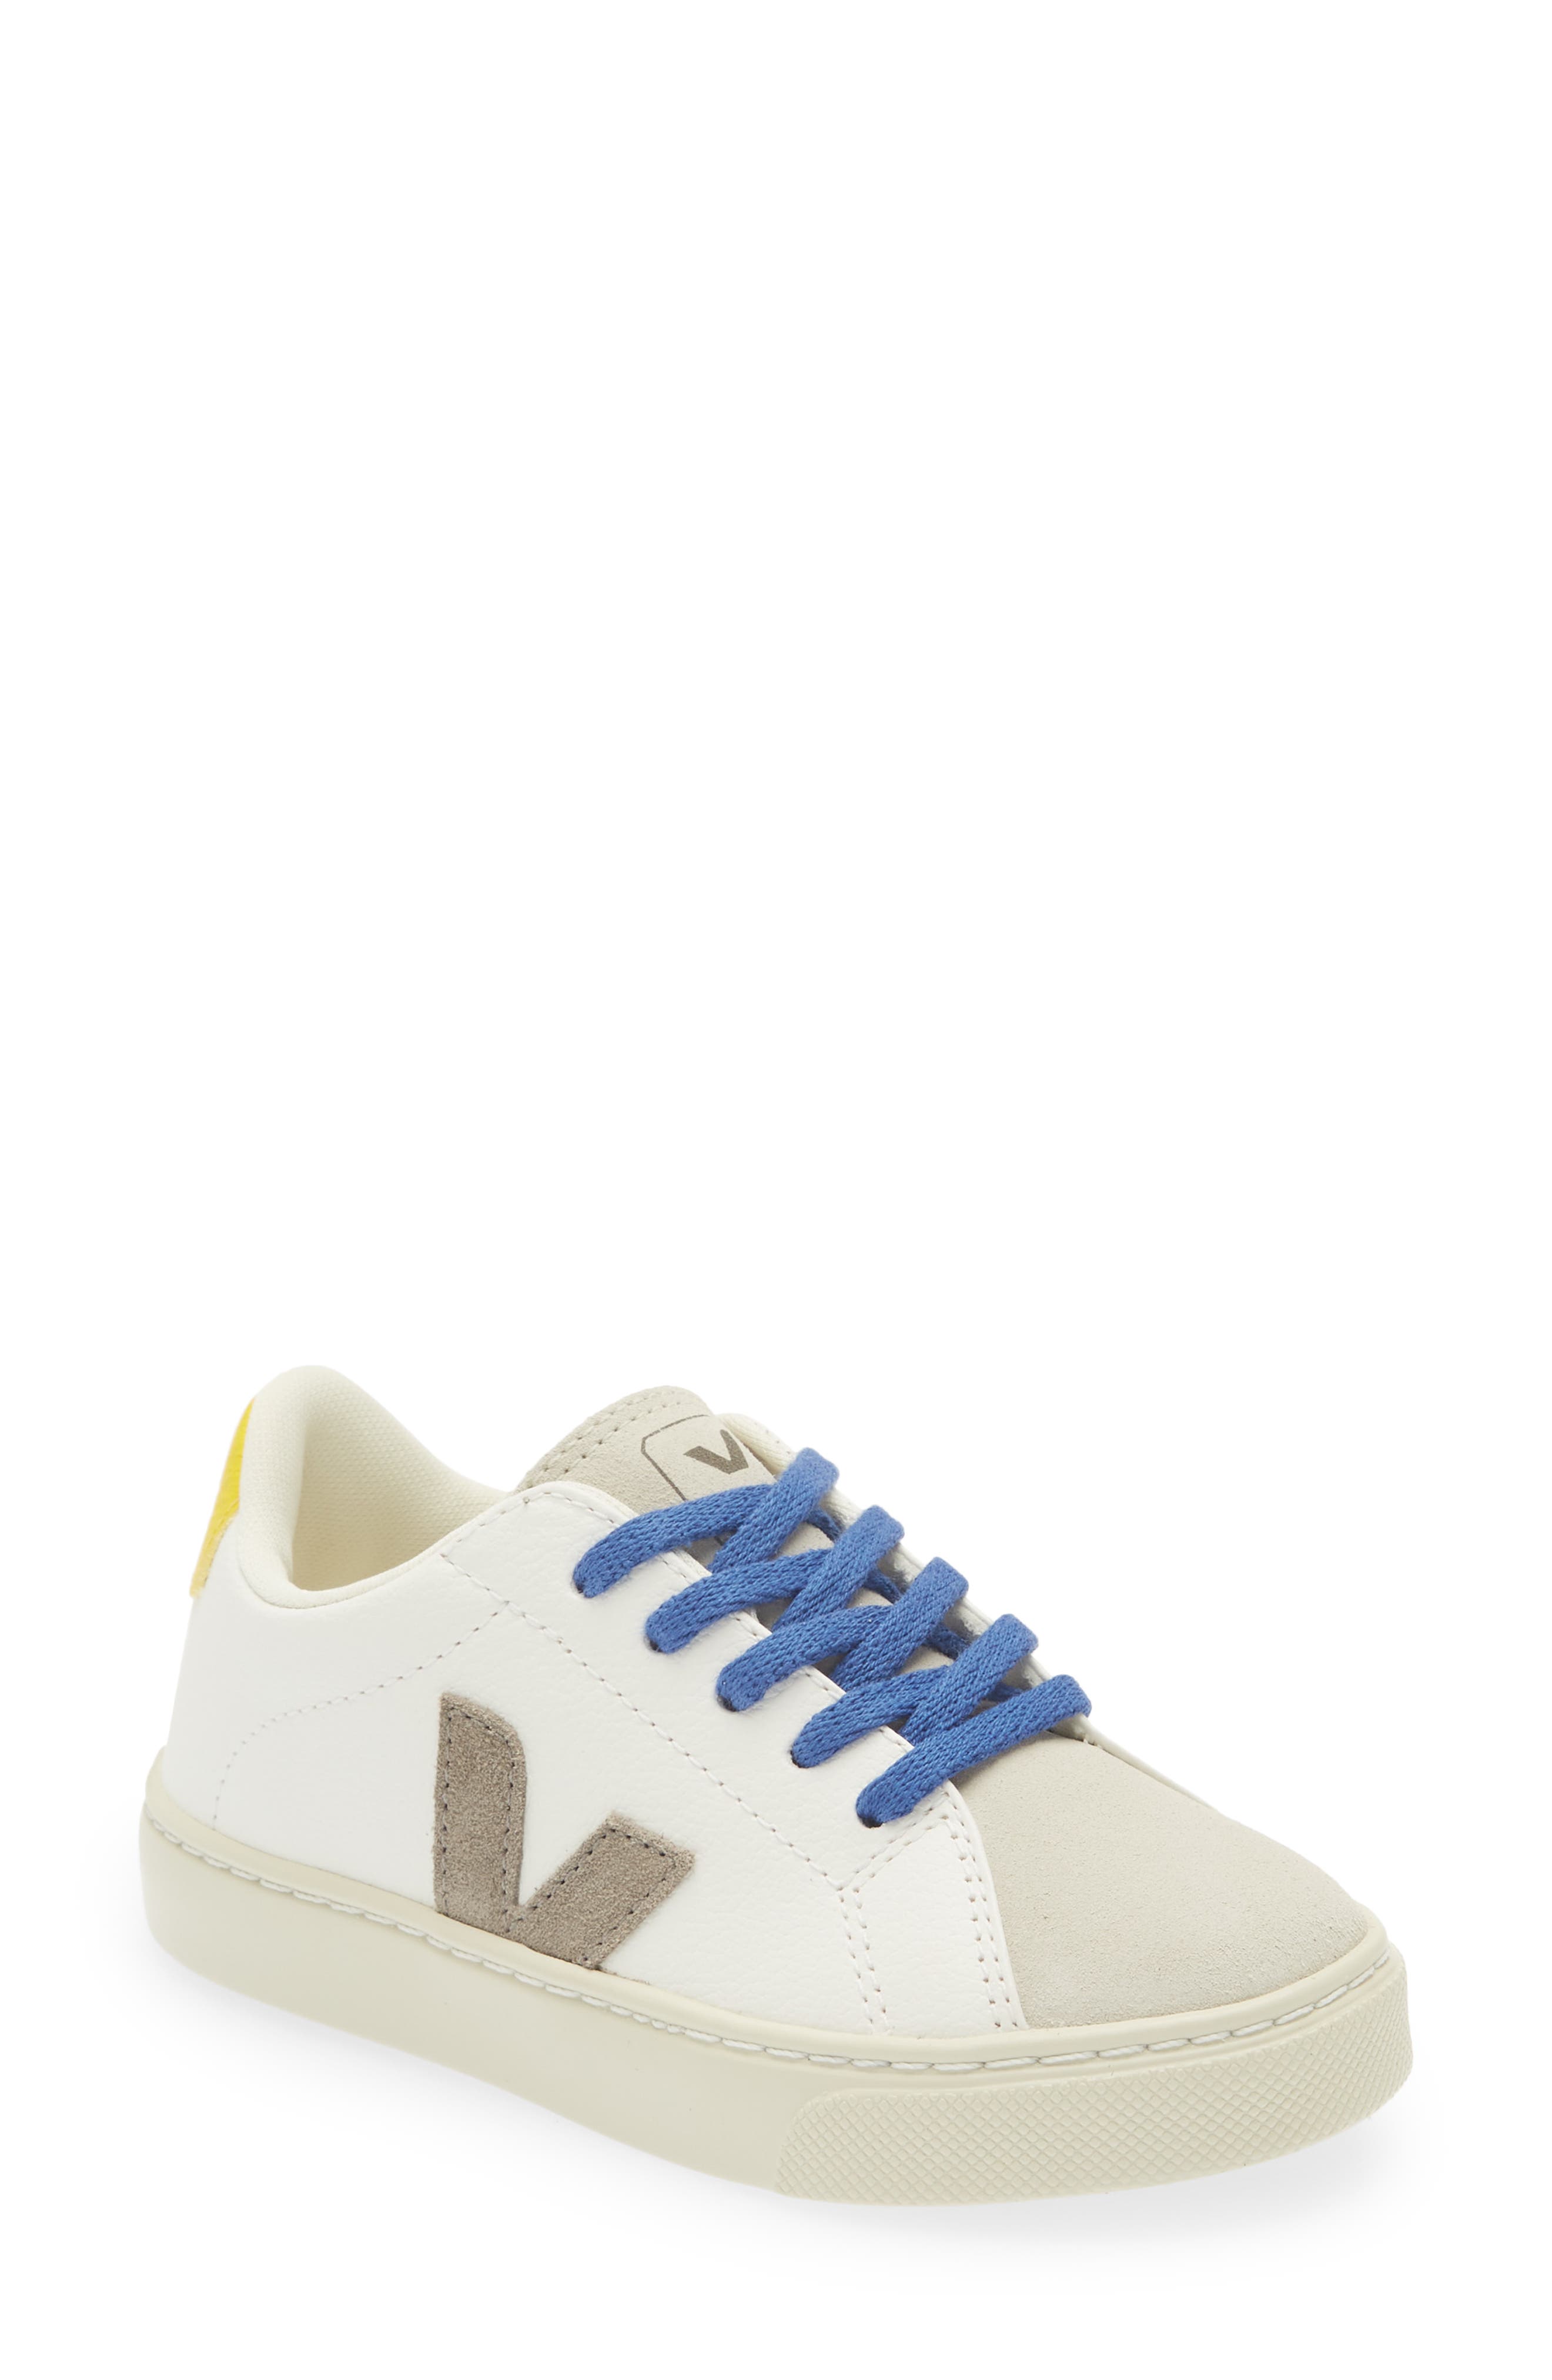 Veja Small Lace-Up Esplar Sneaker in Extra White Moonrock Tonic at Nordstrom, Size 11Us